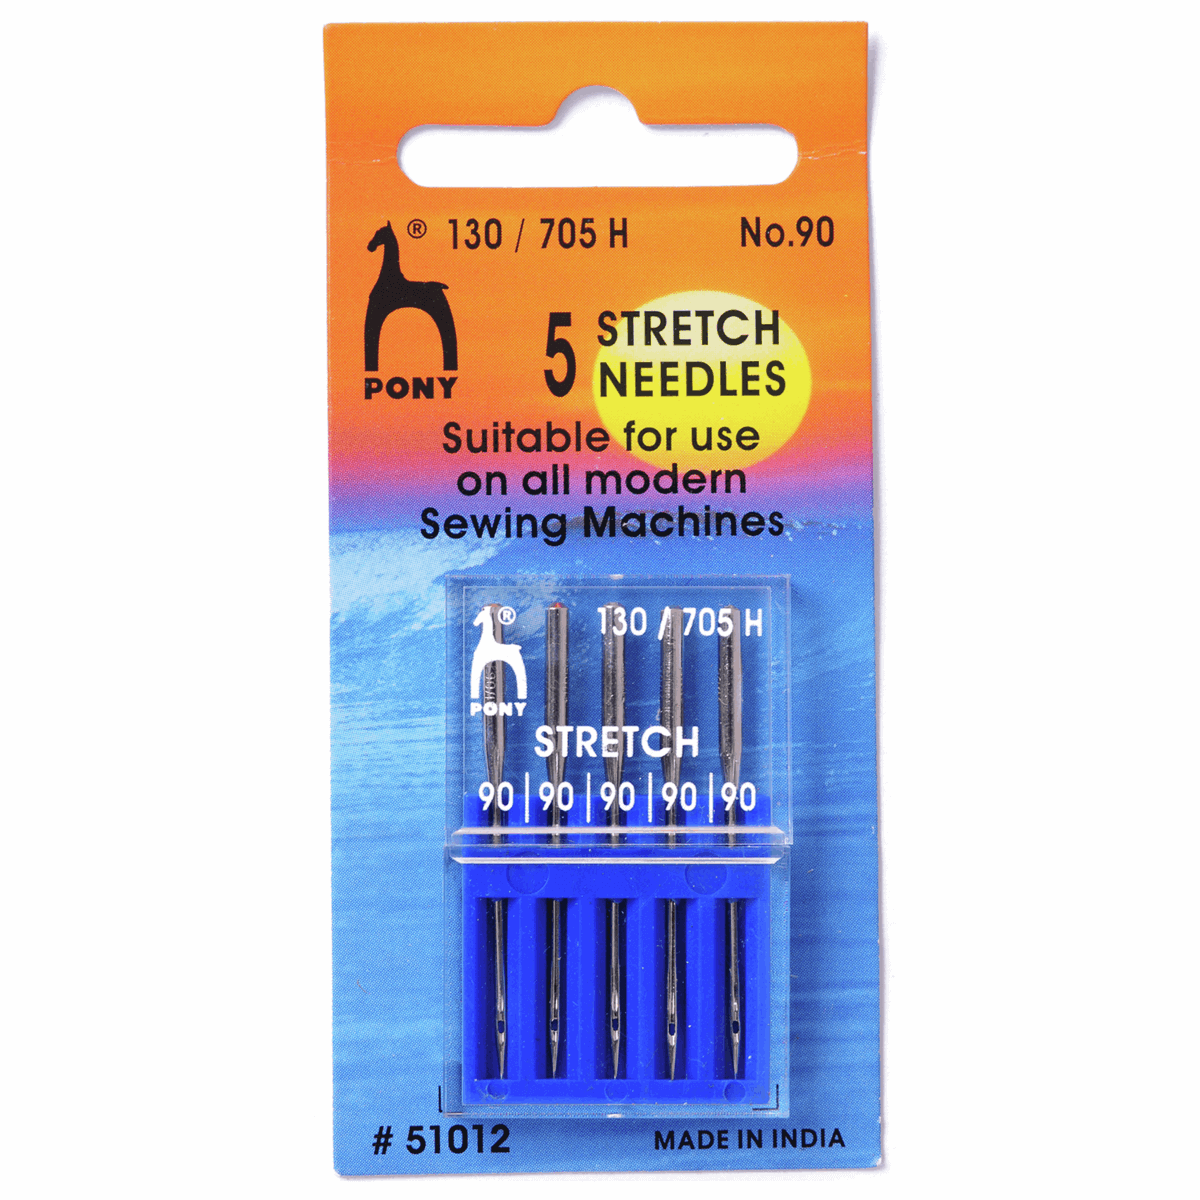 Stretch sewing needles: pony 90 130/705H standard fit